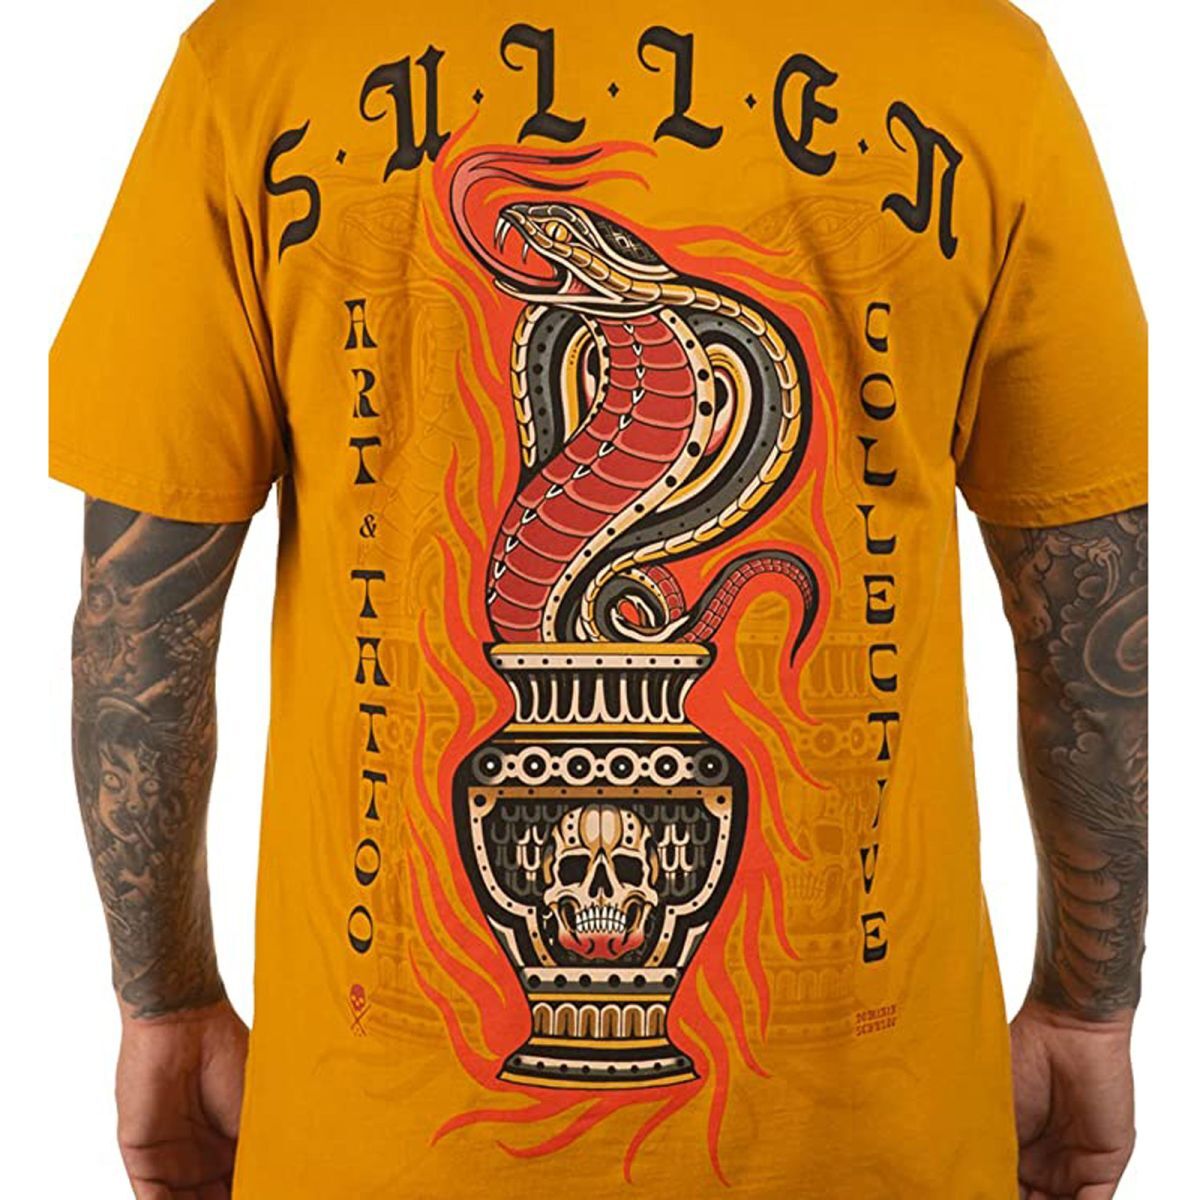 SULLEN-ART-COLLECTIVE-CHARMED-SS-TEE - T-SHIRT - Synik Clothing - synikclothing.com